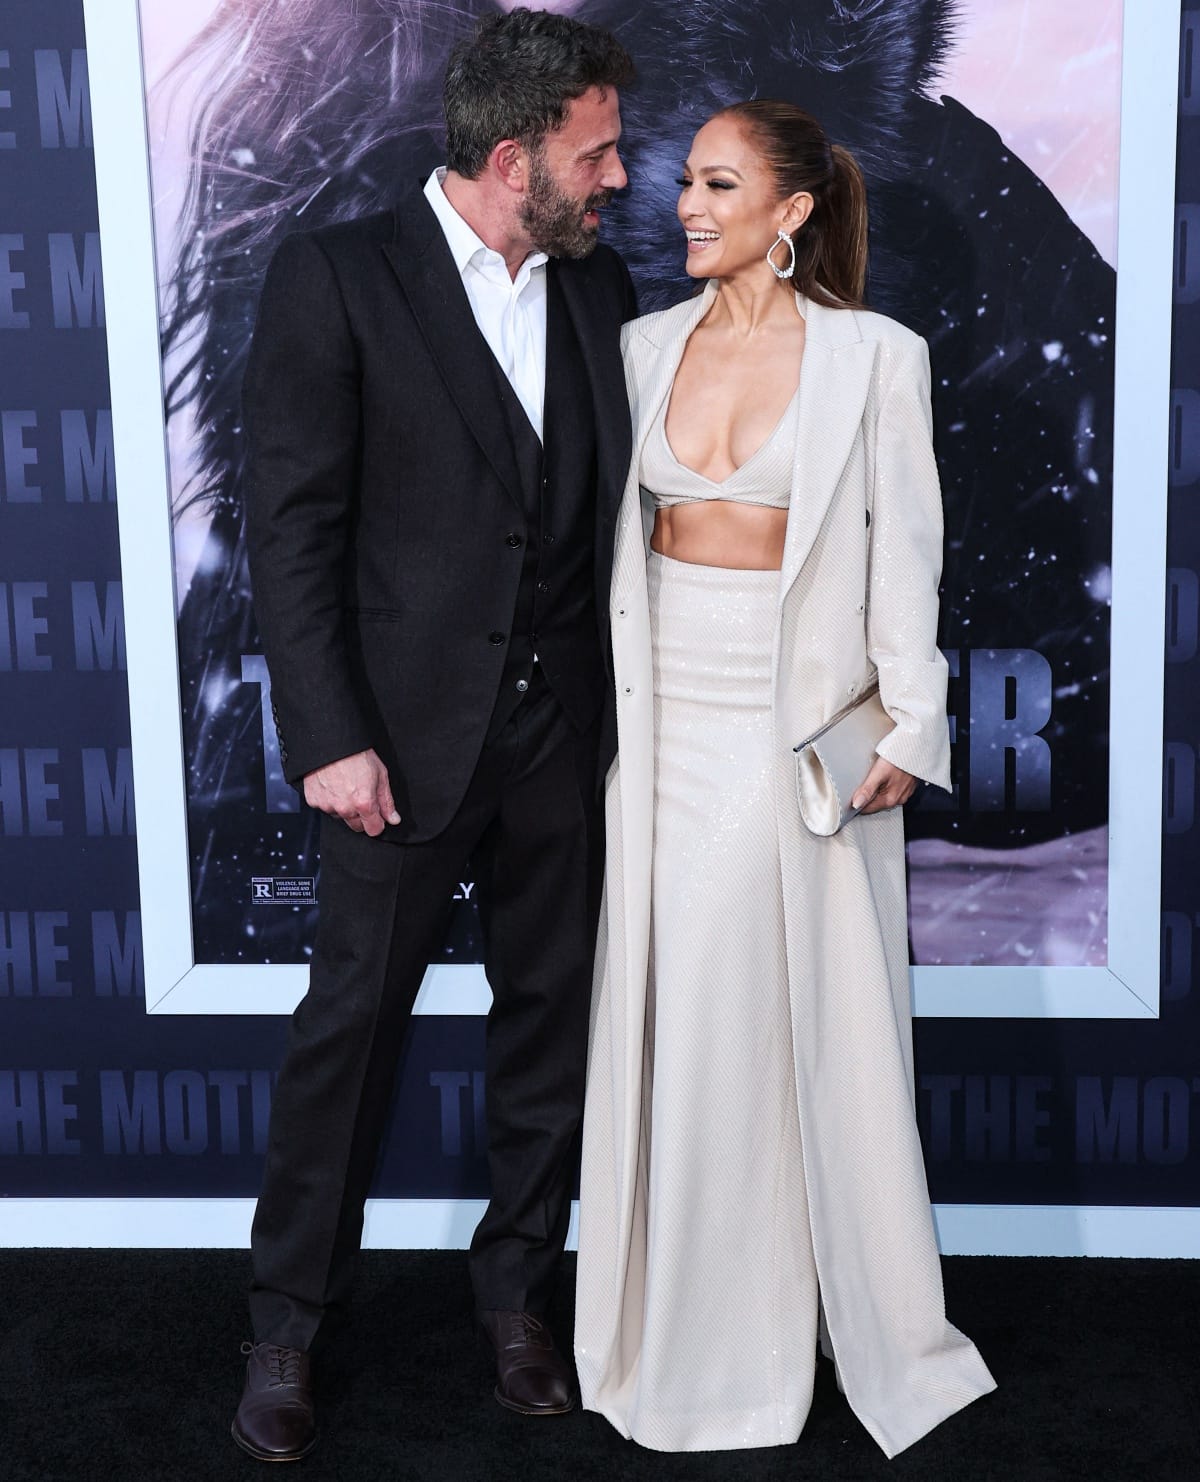 Ben Affleck and Jennifer Lopez stole the show as they stepped out on the black carpet for the premiere of The Mother